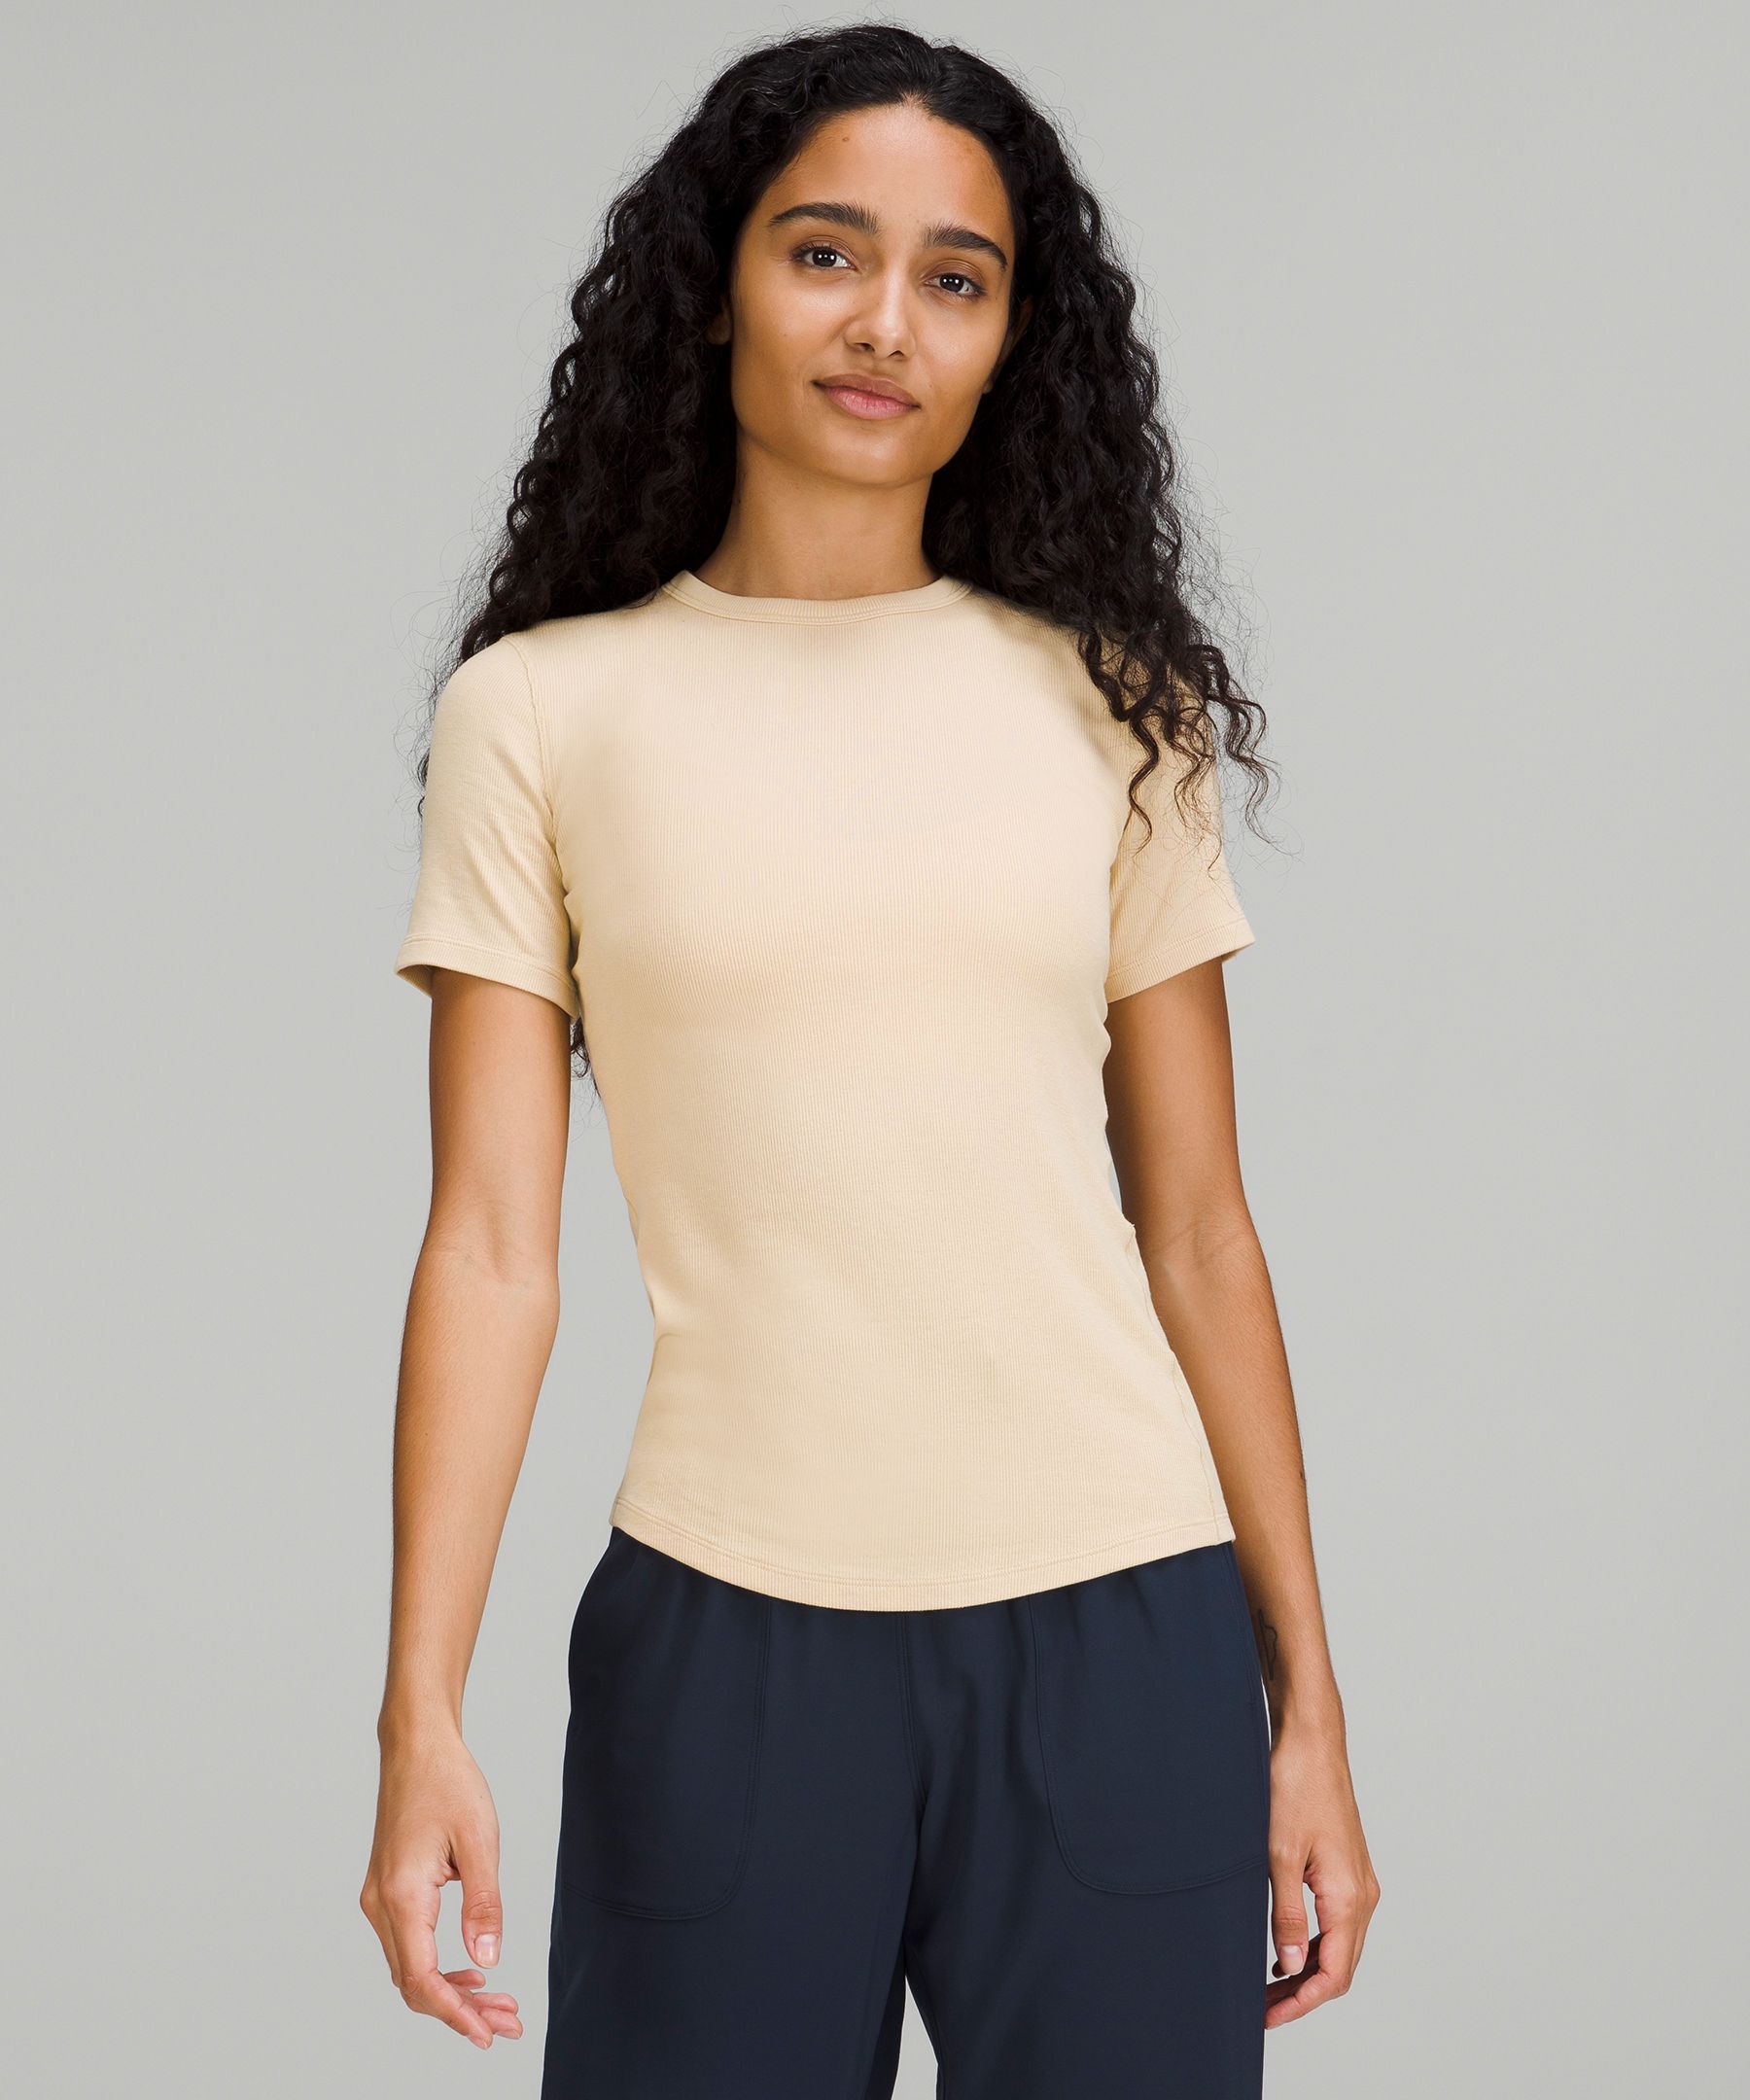 Lululemon Hold Tight Short Sleeve Shirt In Prosecco